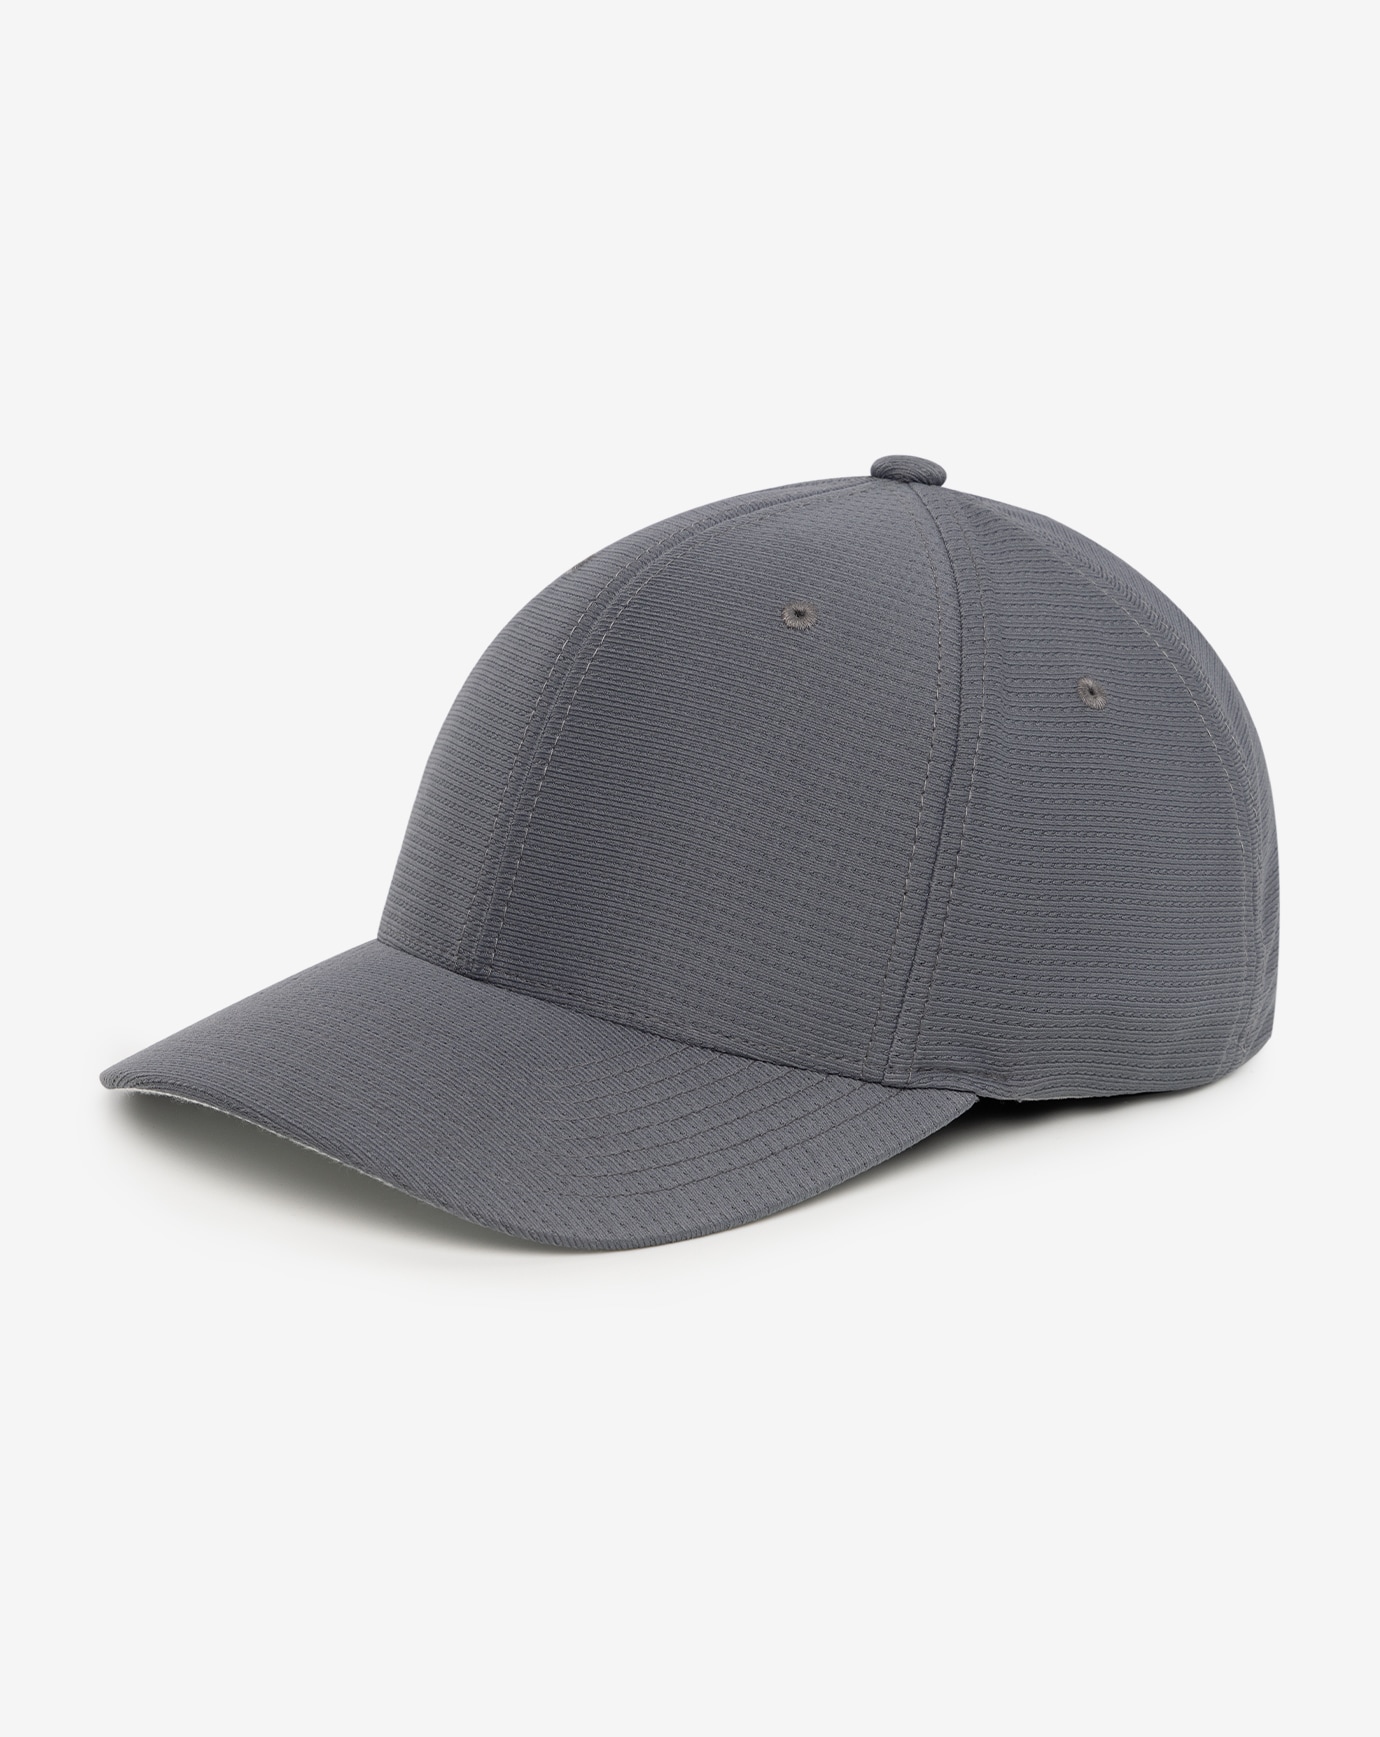 NASSAU FITTED HAT Image Thumbnail 2